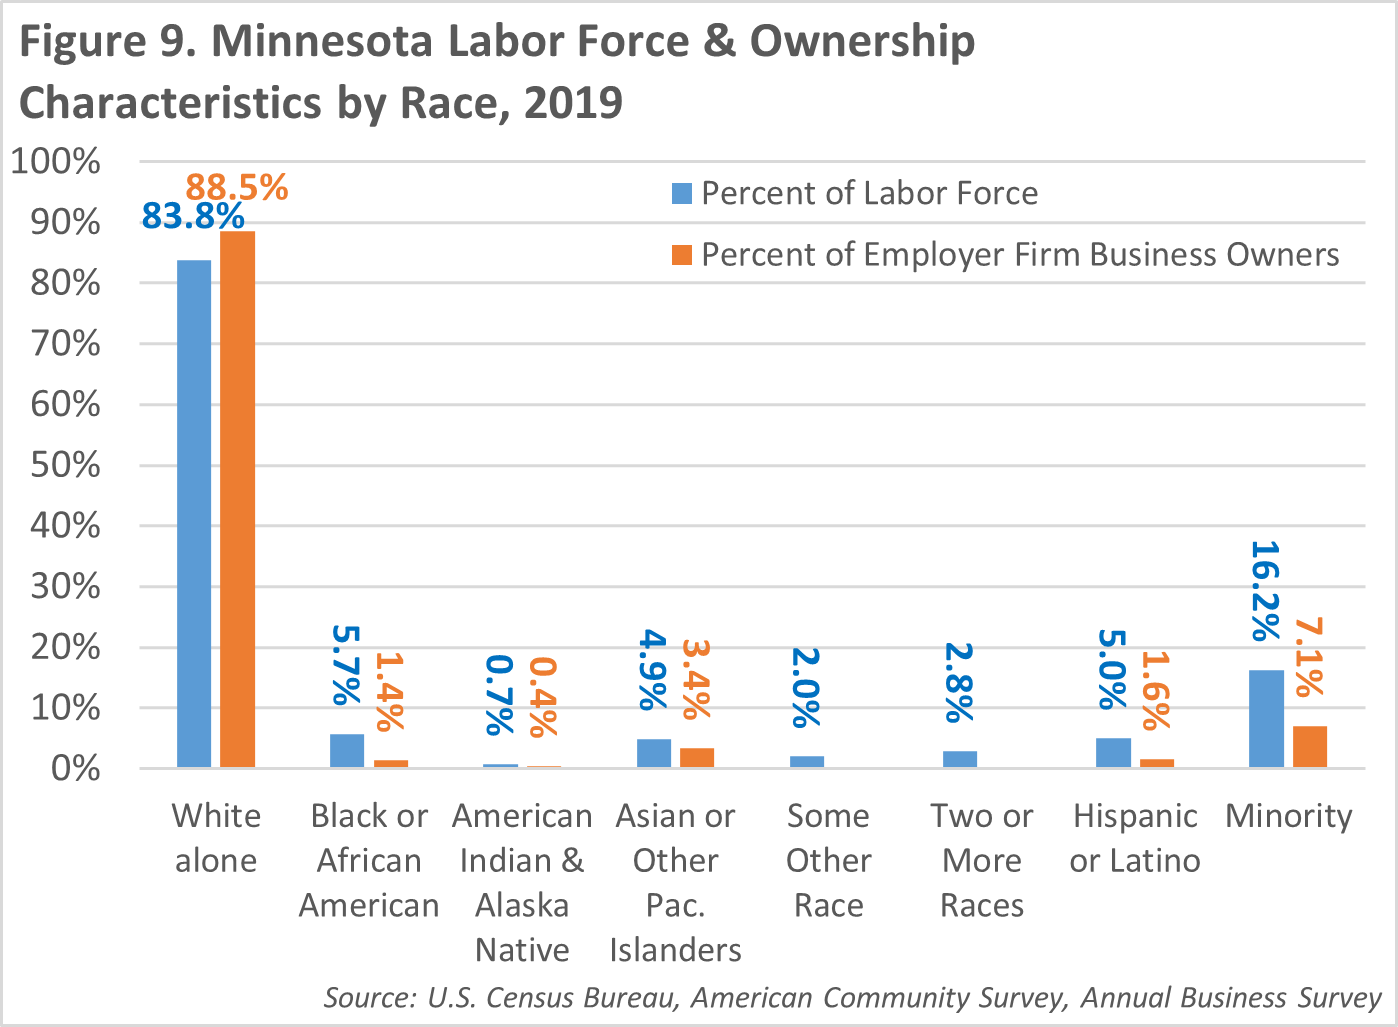 Figure 9: Minnesota Labor Force and Ownership Characteristics by Race, 2019